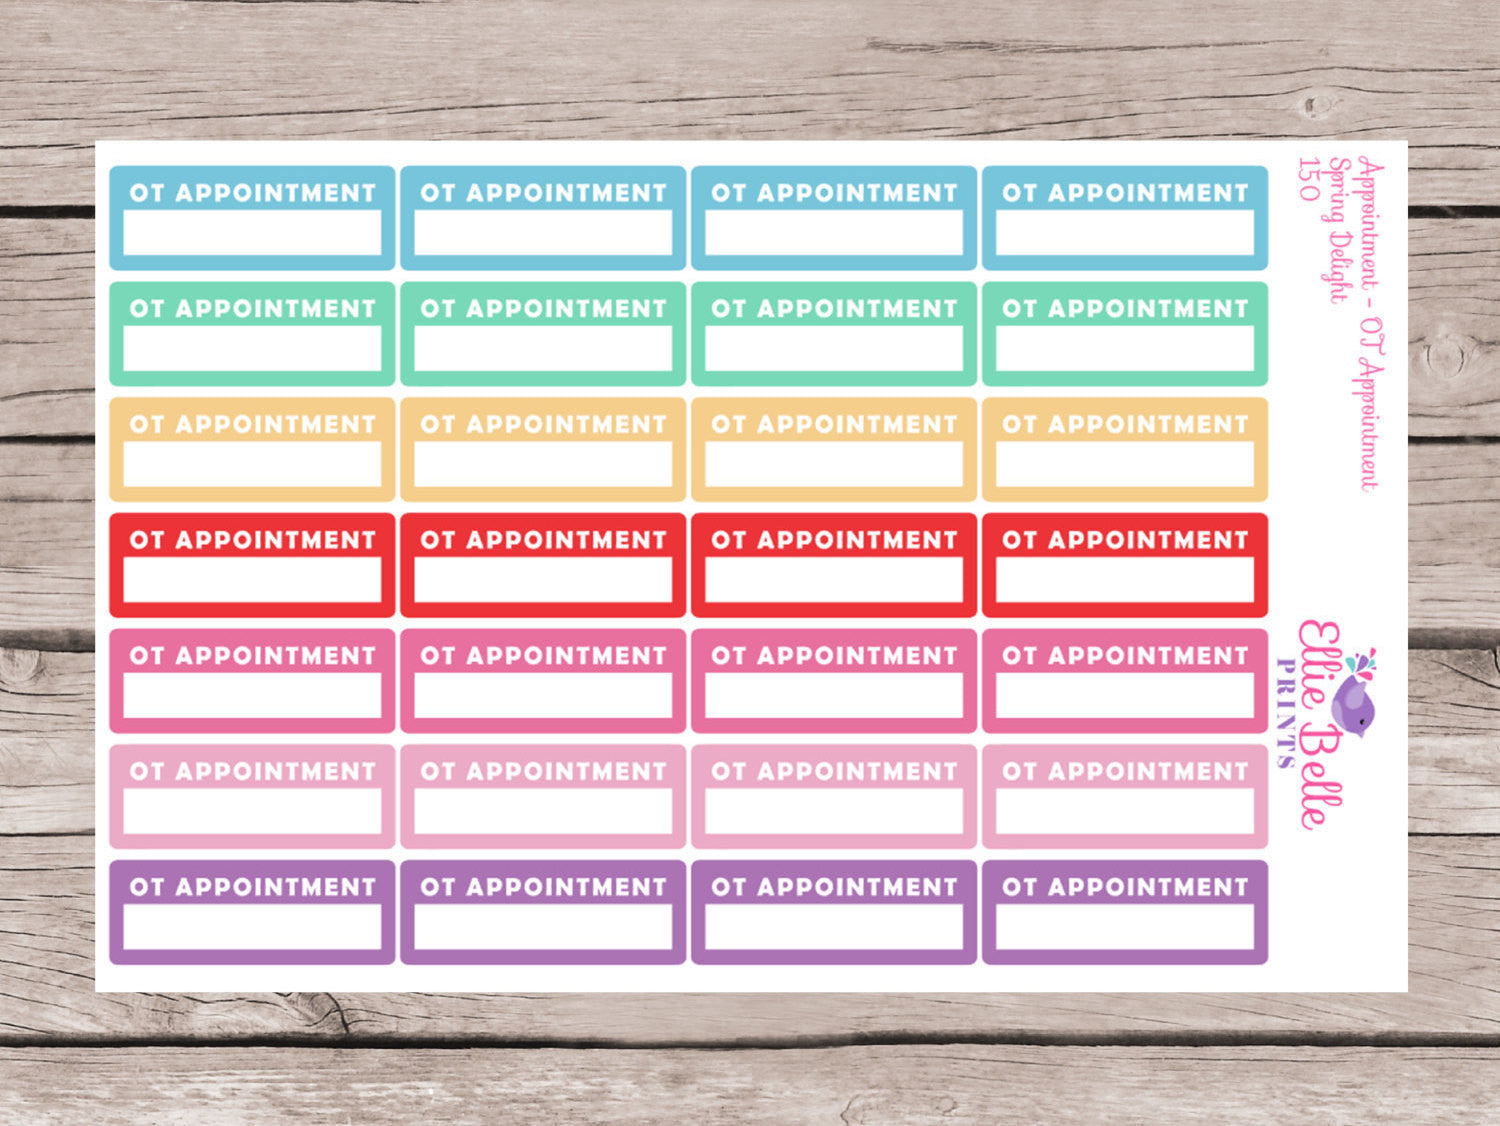 Occupational Therapy Planner Sticker (OT Appointment) - Spring Delight [150]